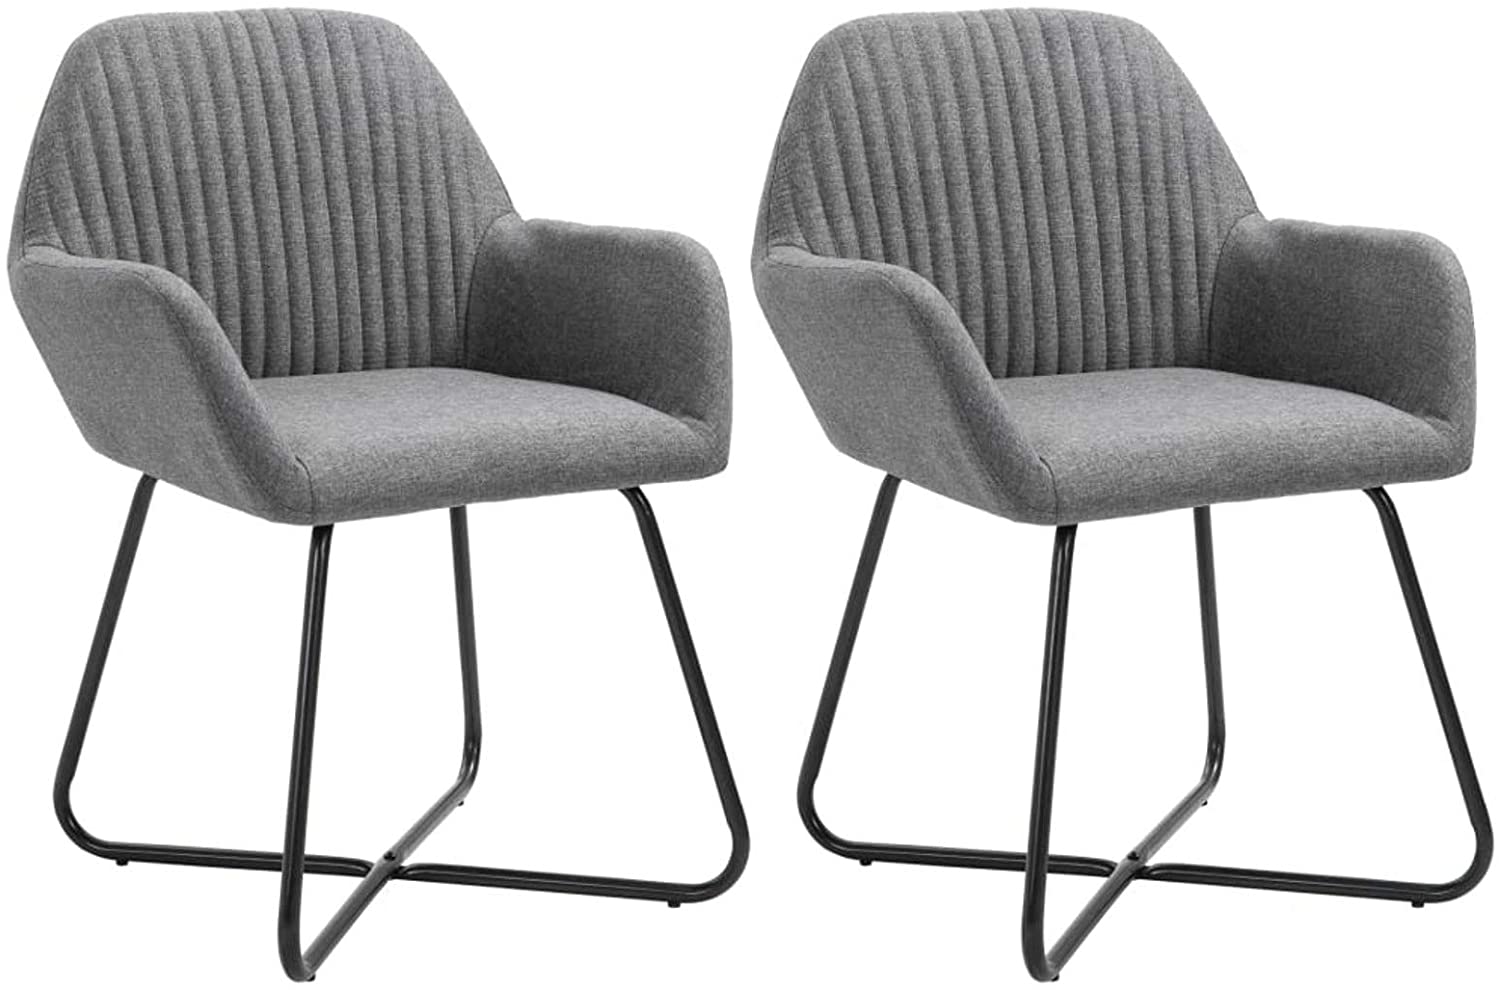 B08RYY9GRM Tidyard 2 Piece Modern Dining Chairs Set Fabric Upholstery Soft Seat Side Chair with Steel Legs and Armrest for Kitchen, Dining Room, Living Room Home Furniture 24 x 24 x 33.1 Inches (W x D x H)